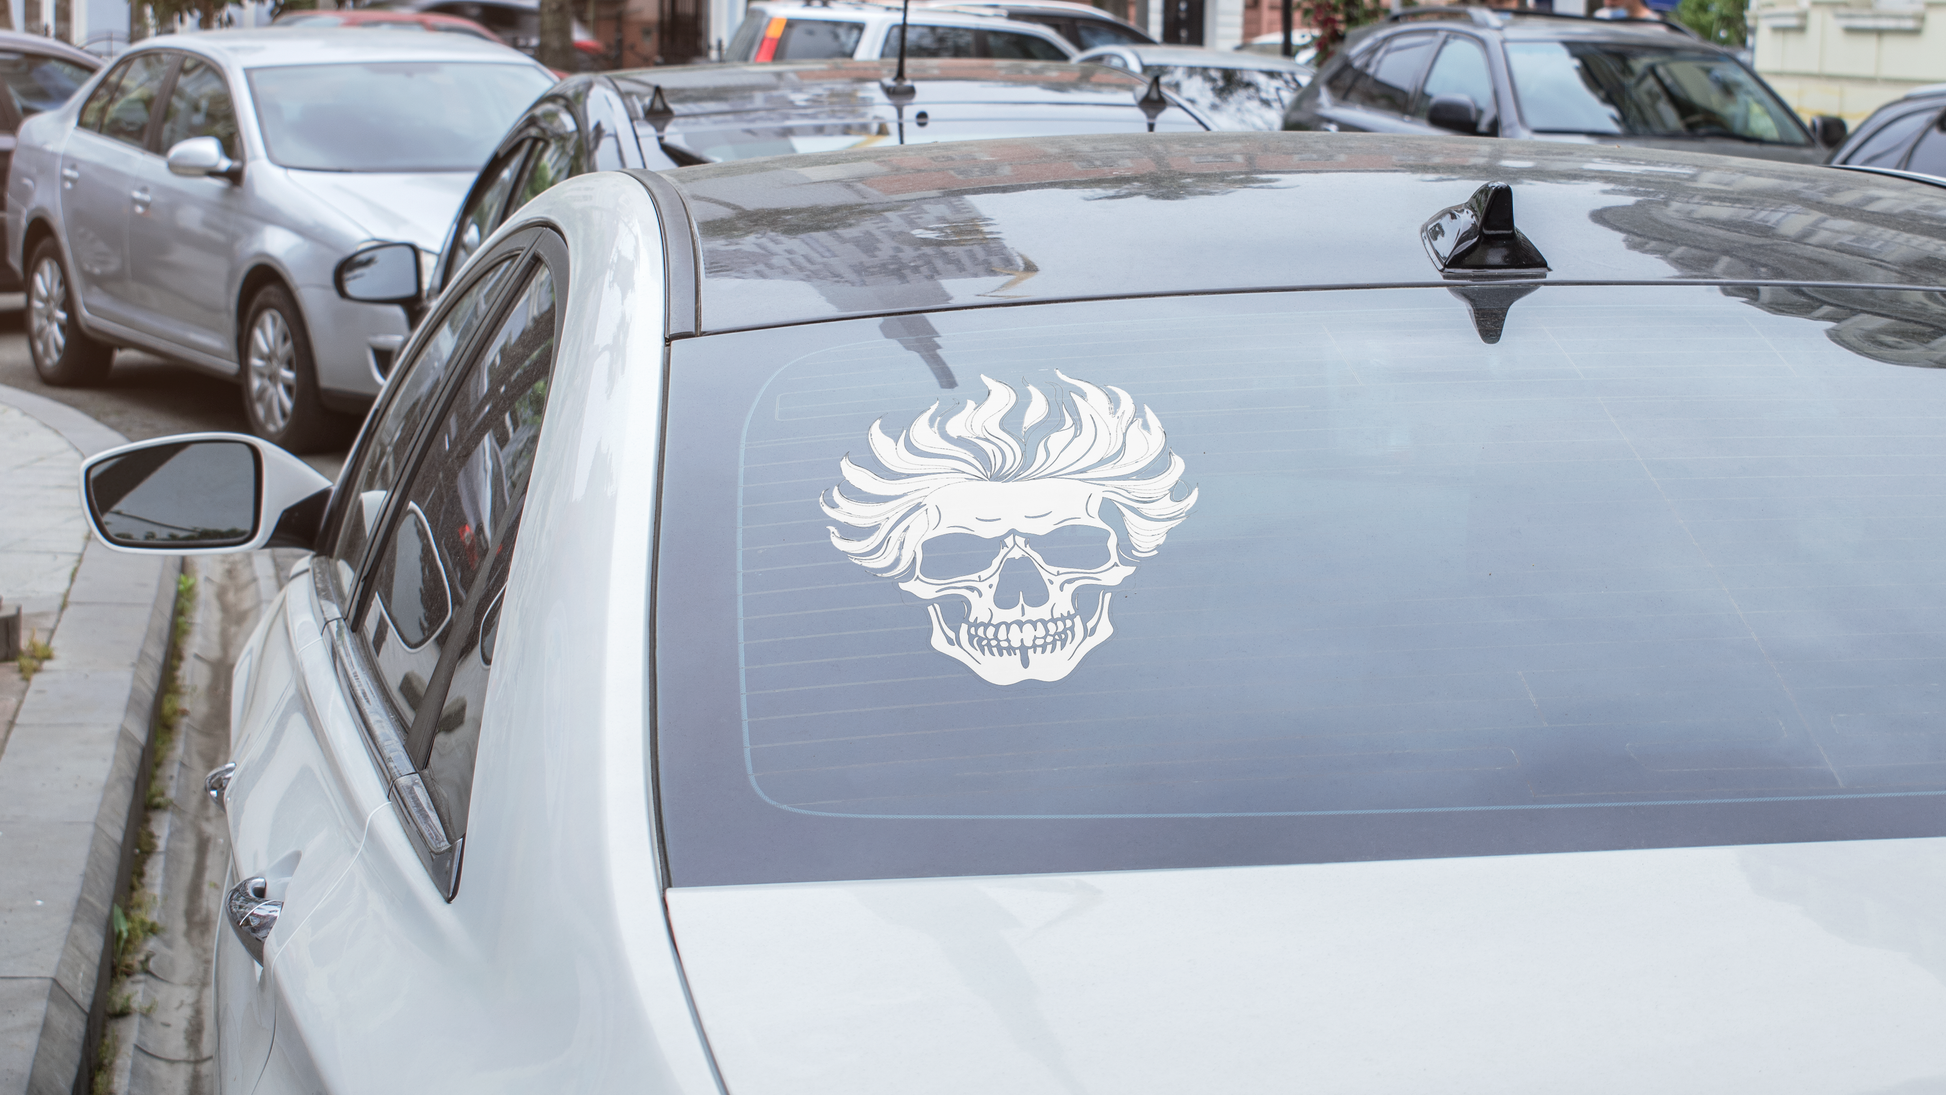 Flaming skull - Vinyl decal 2A boss gift car decor car lovers dads day gift dont tread on me gift for dad gift for grandpa gift for her gift for him gift for husband gift for mom gift for sister gift for wife liberty moms gift skull skull sticker Unique gift Vinyl Vinyl decals vinyl sticker Vinyl stickers window decal window sticker